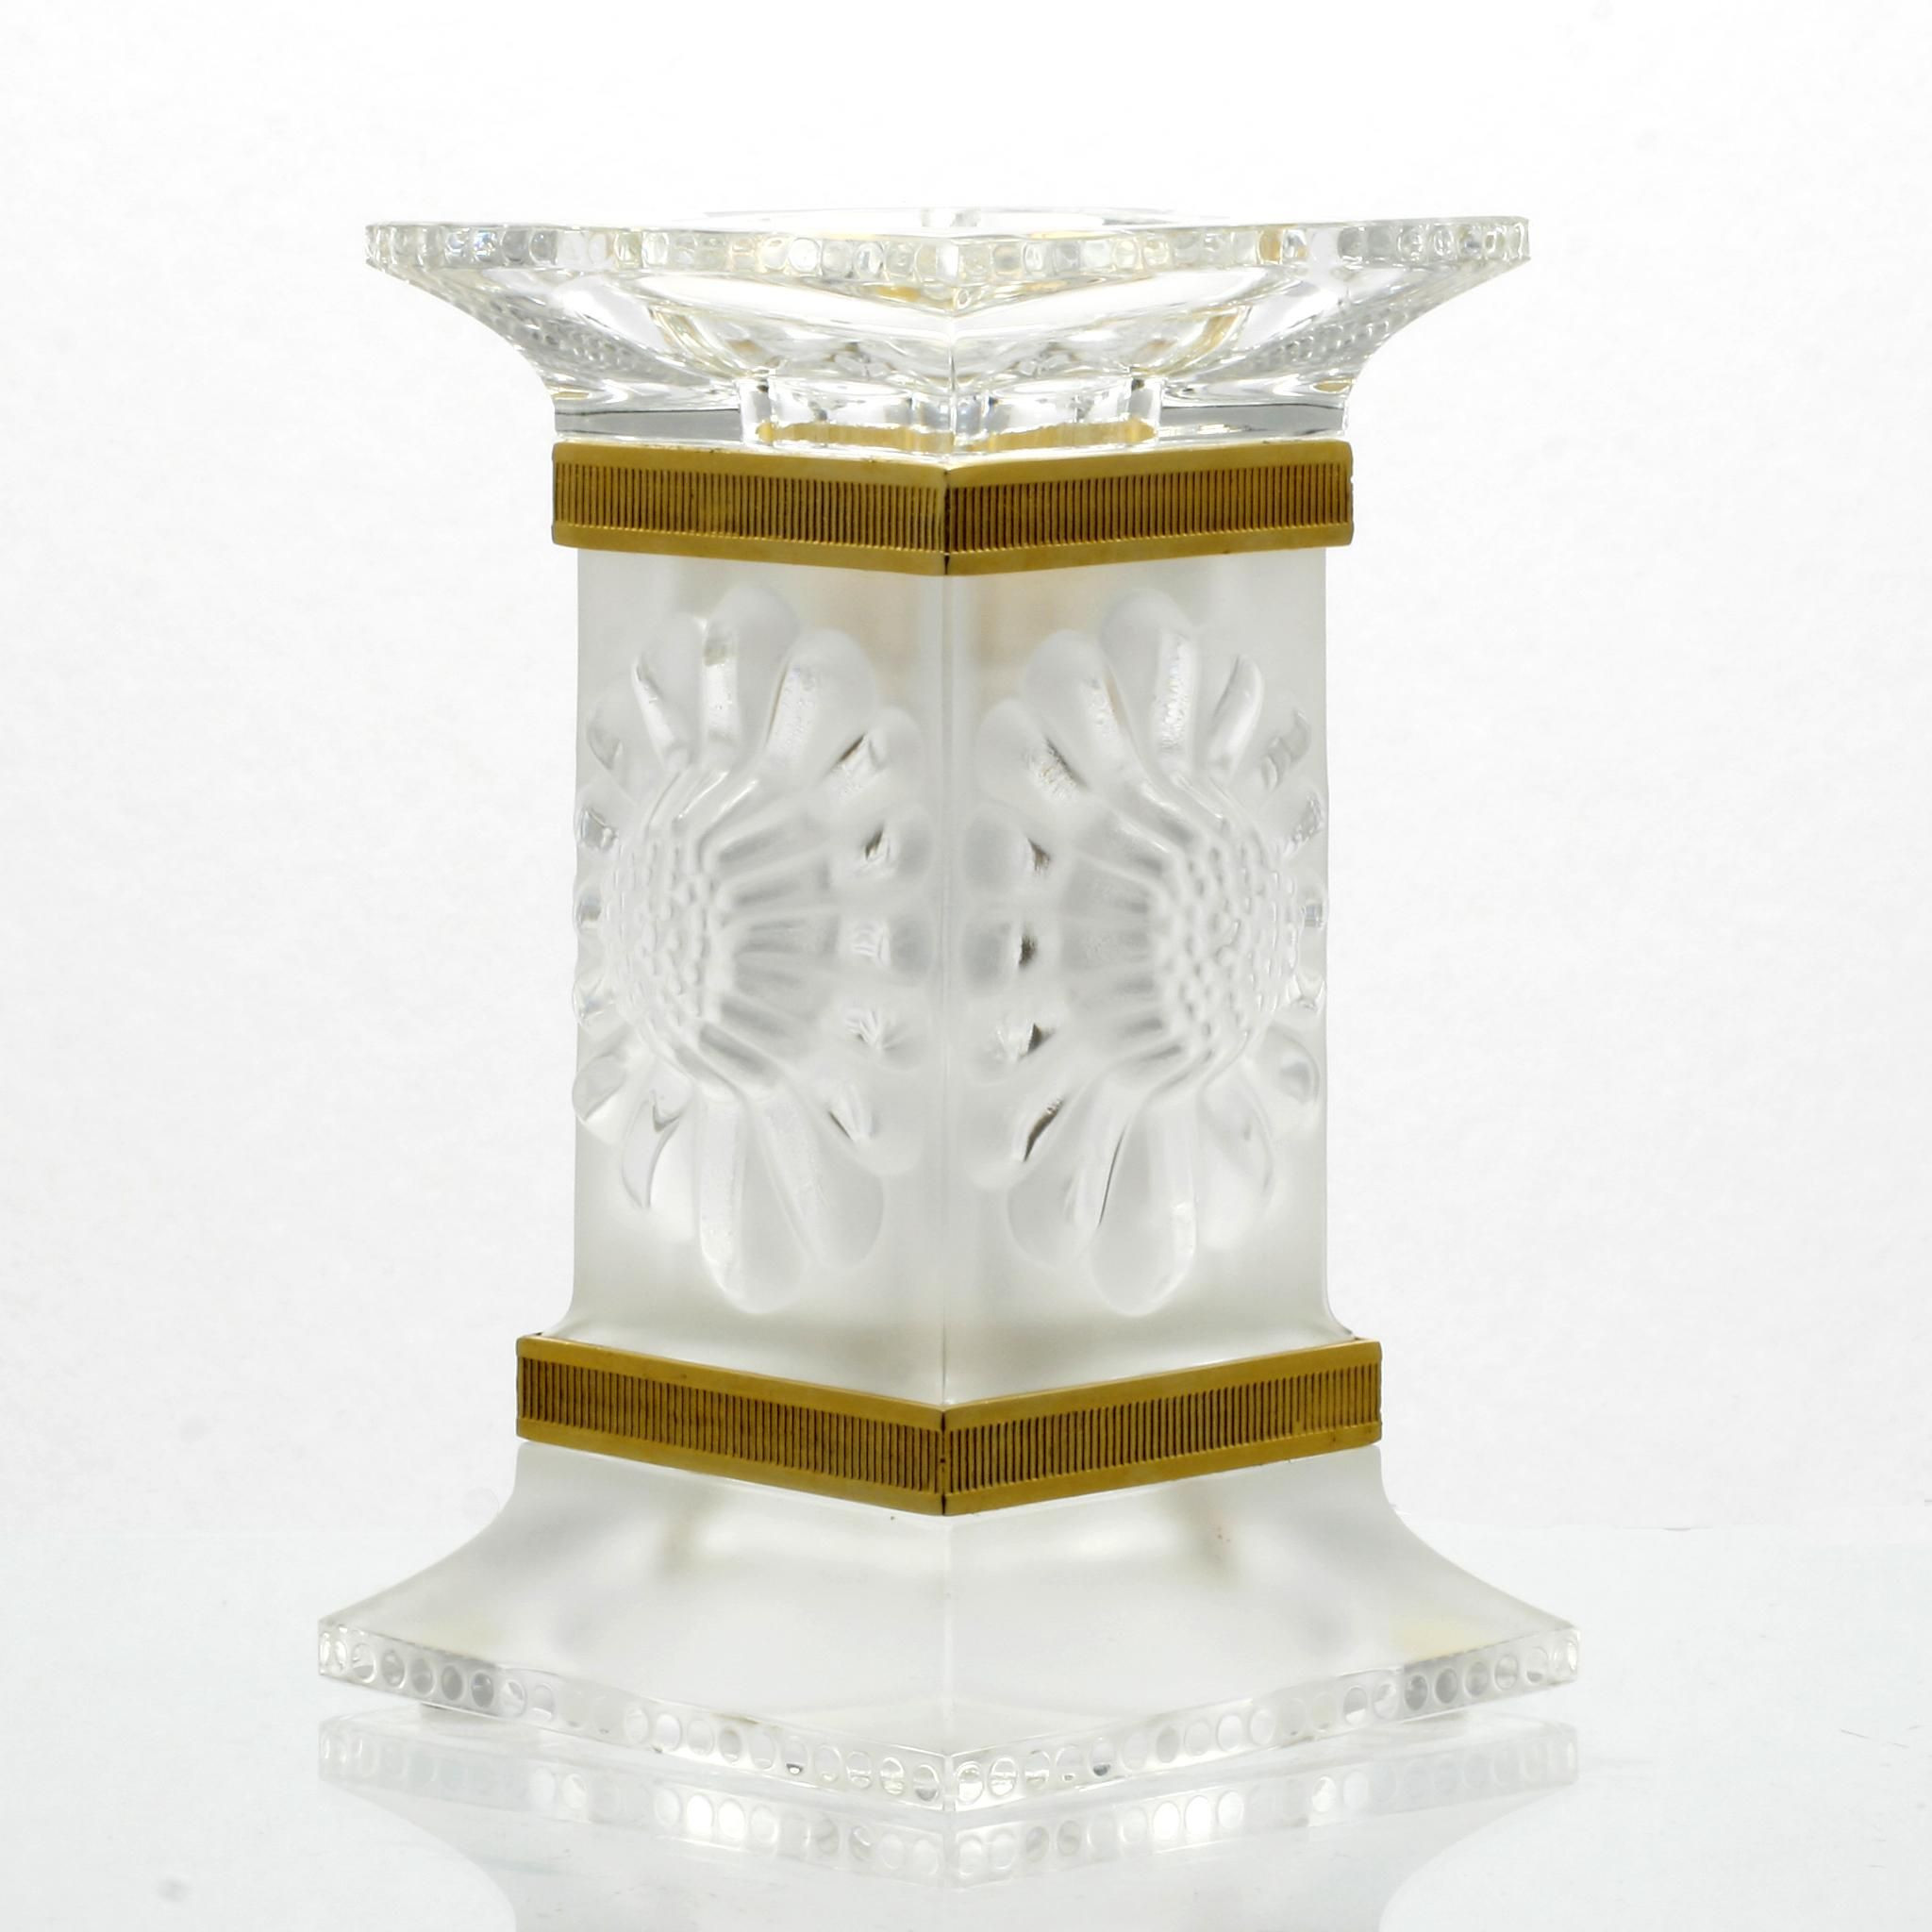 12 Famous Lalique Crystal Dampierre Vase 2022 free download lalique crystal dampierre vase of lalique crystal paquerettes candle holder daisy flower gilt band intended for lalique crystal paquerettes candle holder daisy flower gilt band france candle